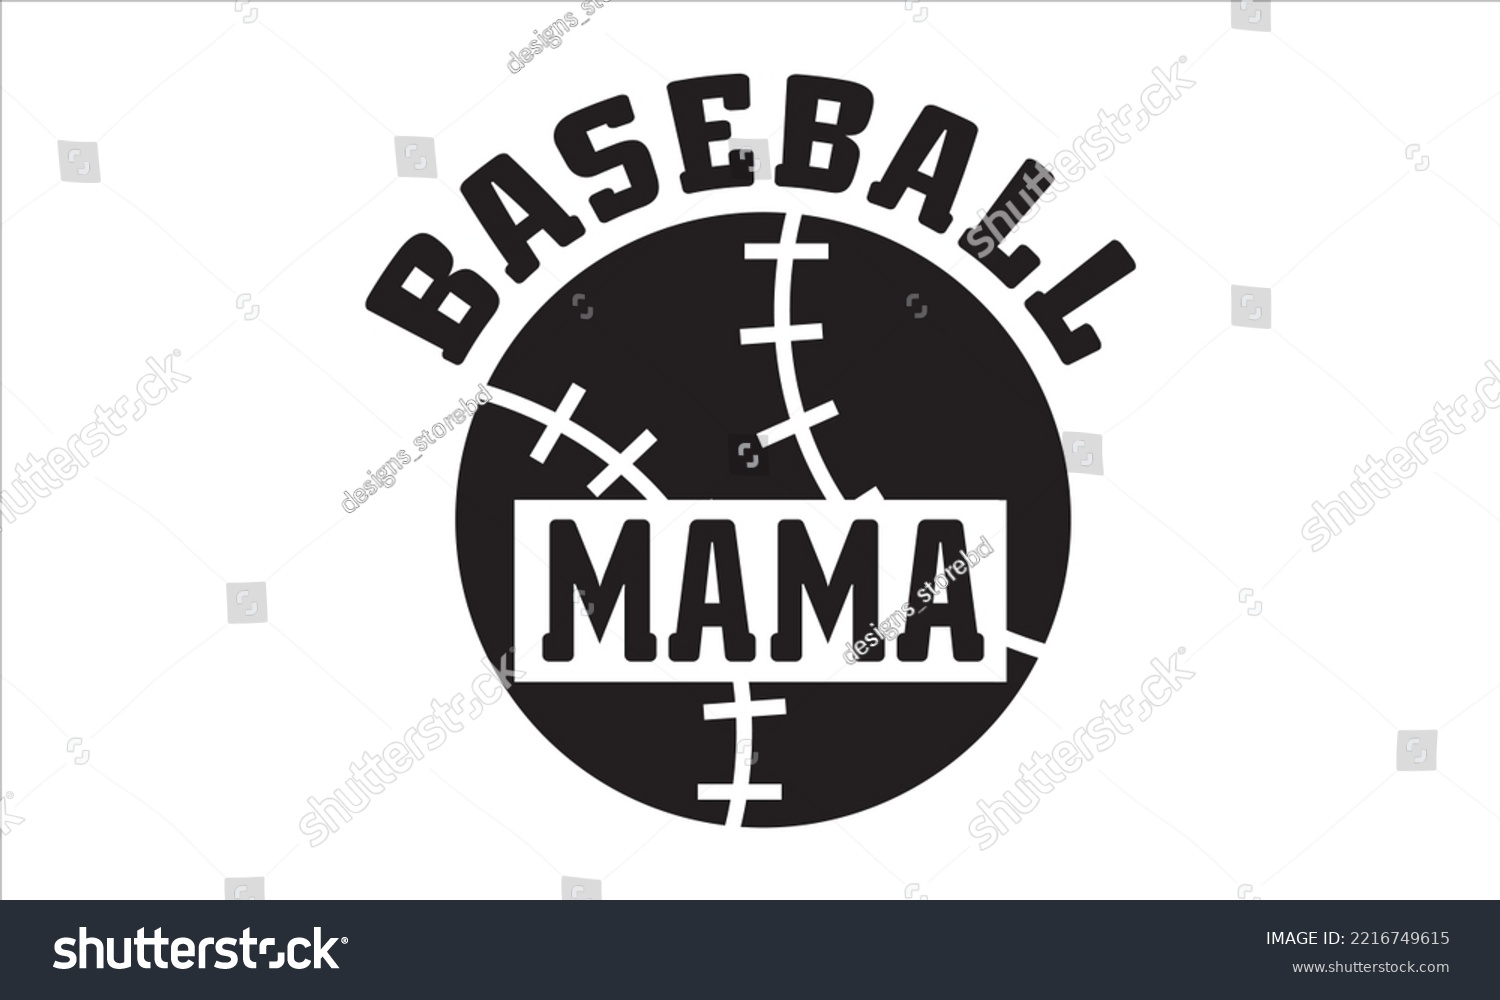 SVG of Baseball mama SVG,  baseball svg, baseball shirt, softball svg, softball mom life, Baseball svg bundle, Files for Cutting Typography Circuit and Silhouette, digital download Dxf, png svg